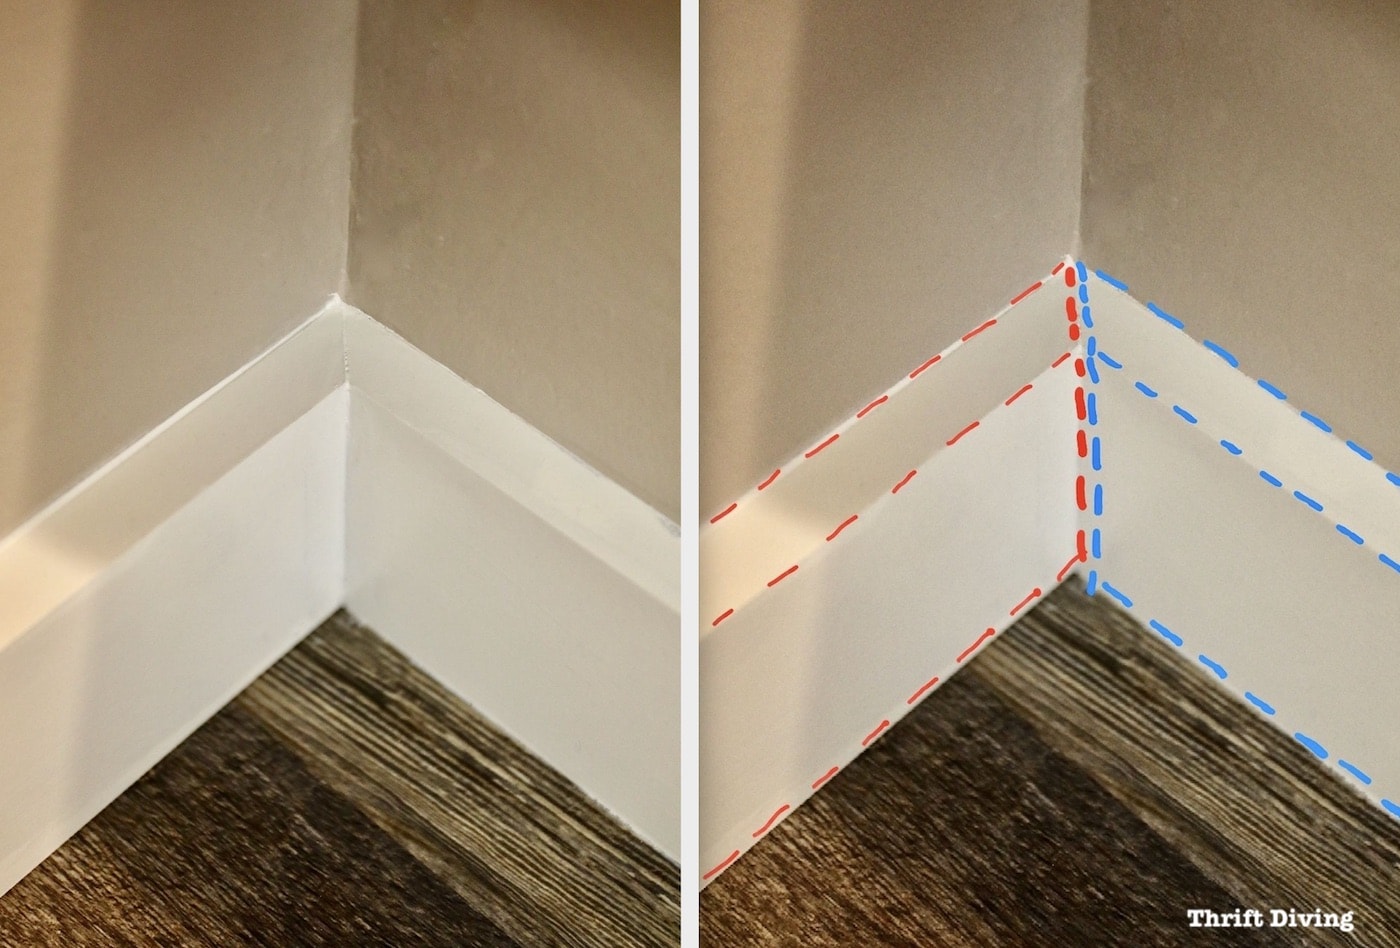 How To Install Pvc Baseboard In Bathroom How to Install Baseboard Yourself: A Step-by-Step Guide